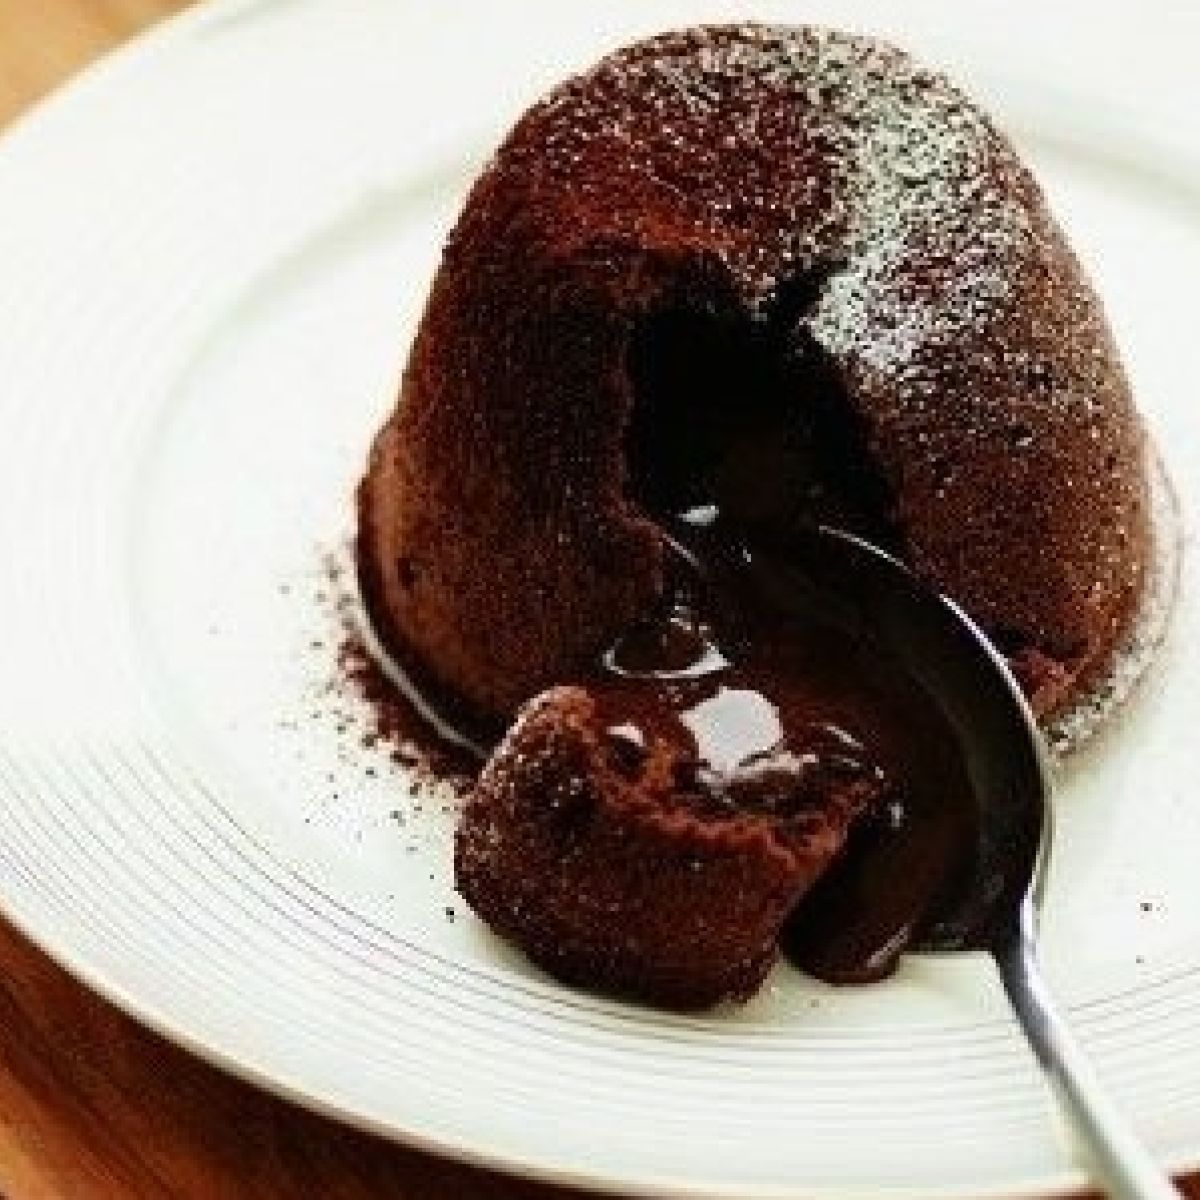 Try This Luxury Chocolate Fondant Recipe From A Michelin-Starred Chef